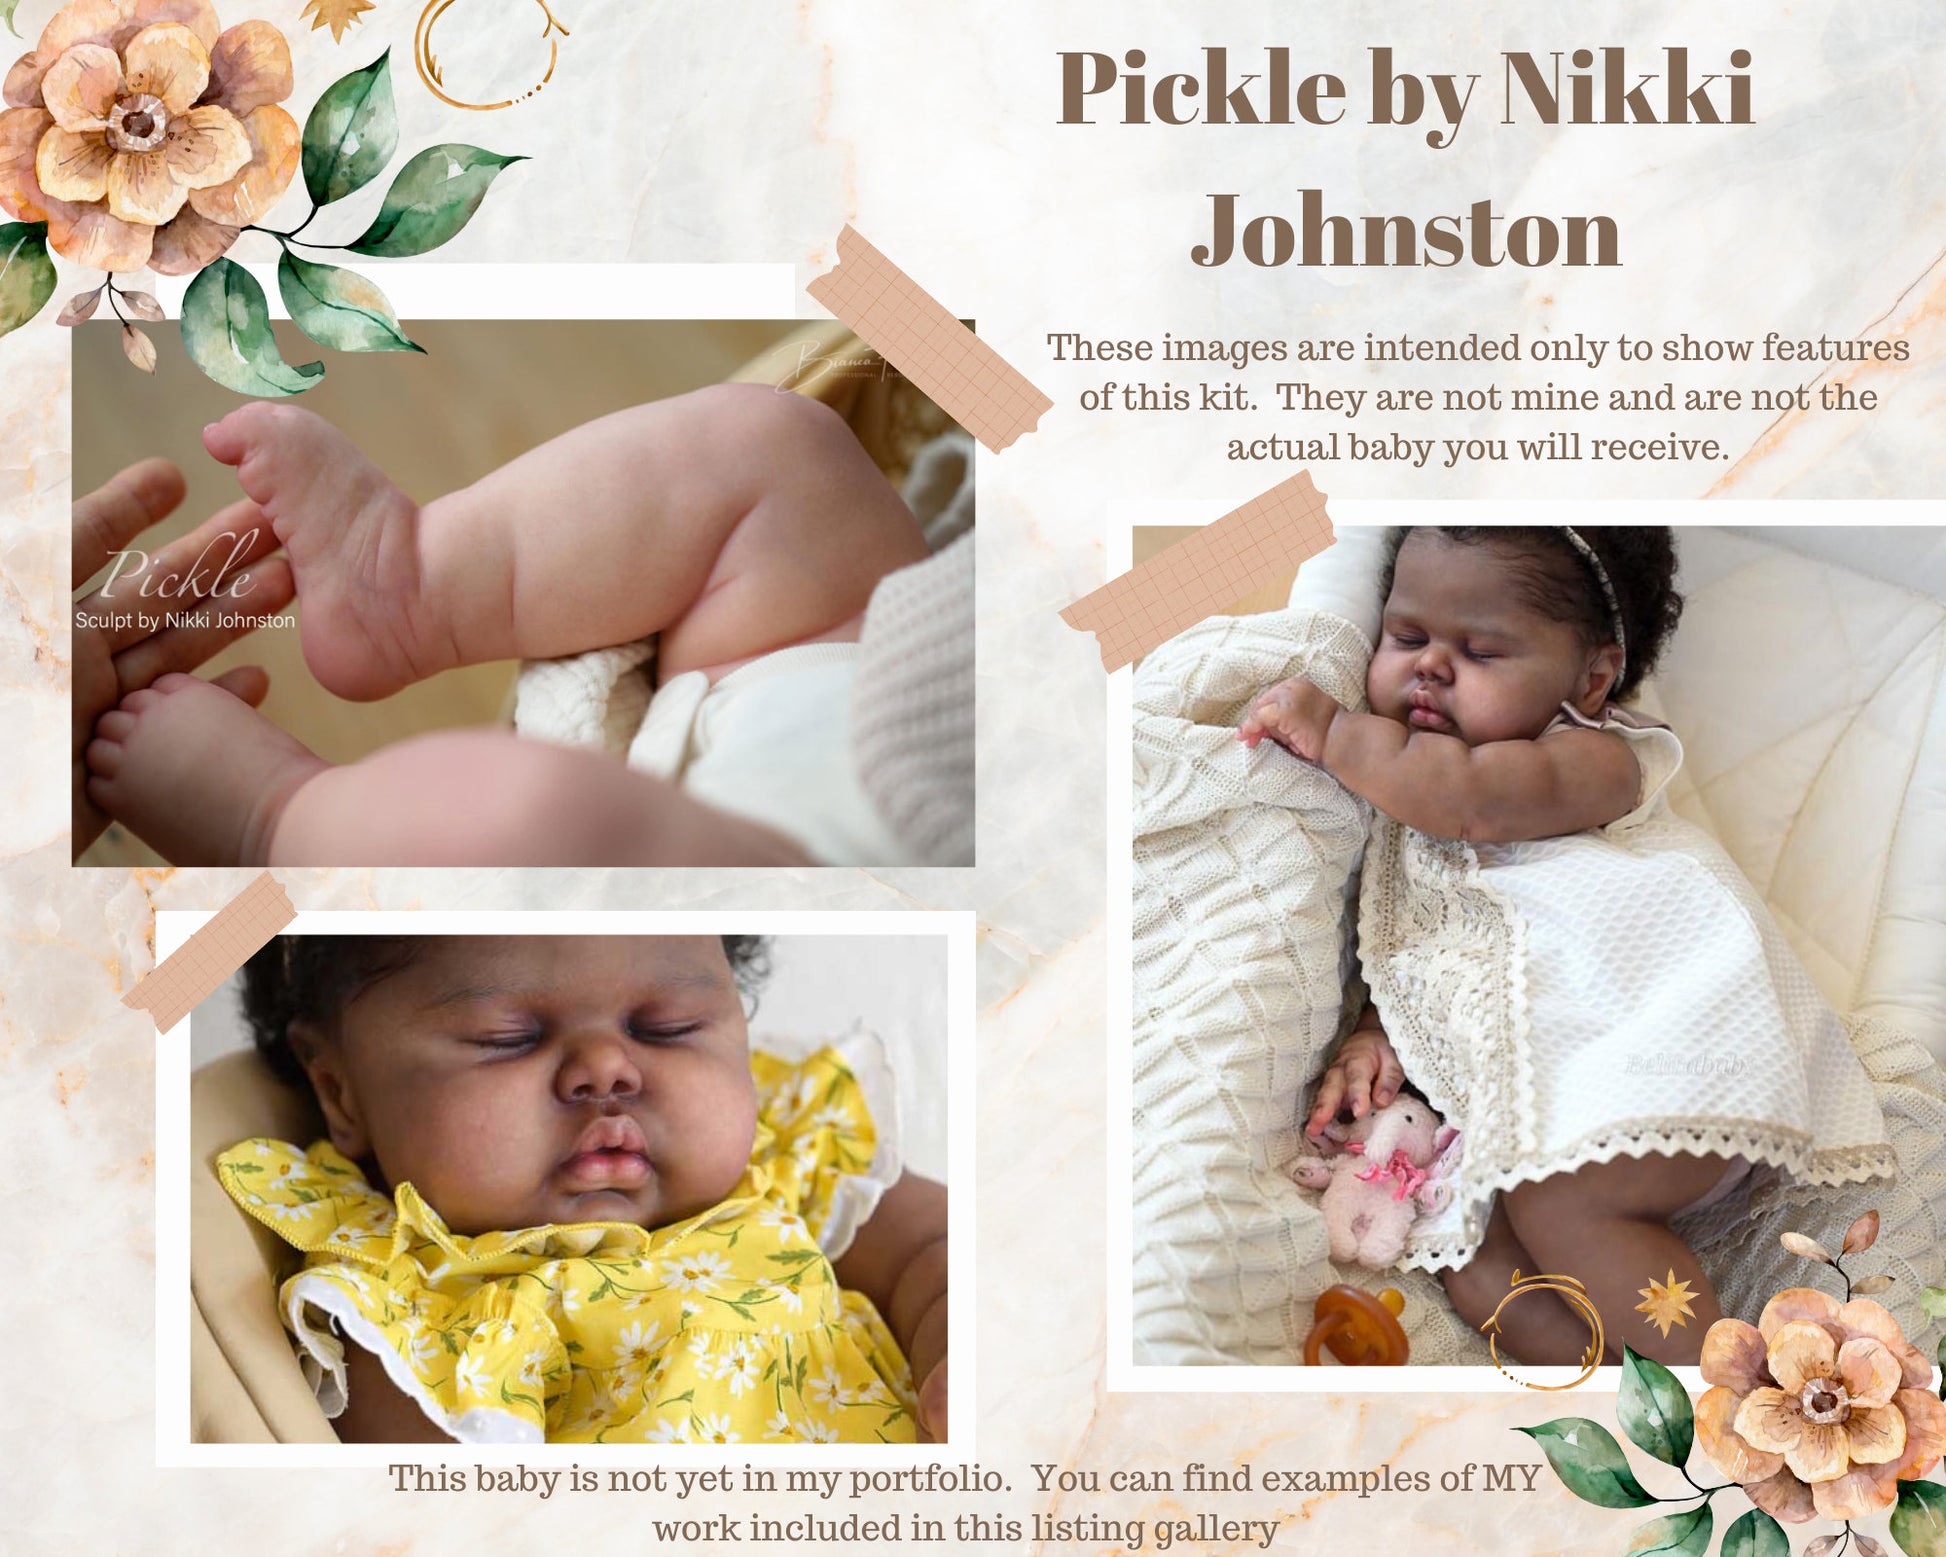 Ultra-Realistic ReBoRn BaBy Pickle by Nikki Johnston (24"+Full Limbs)